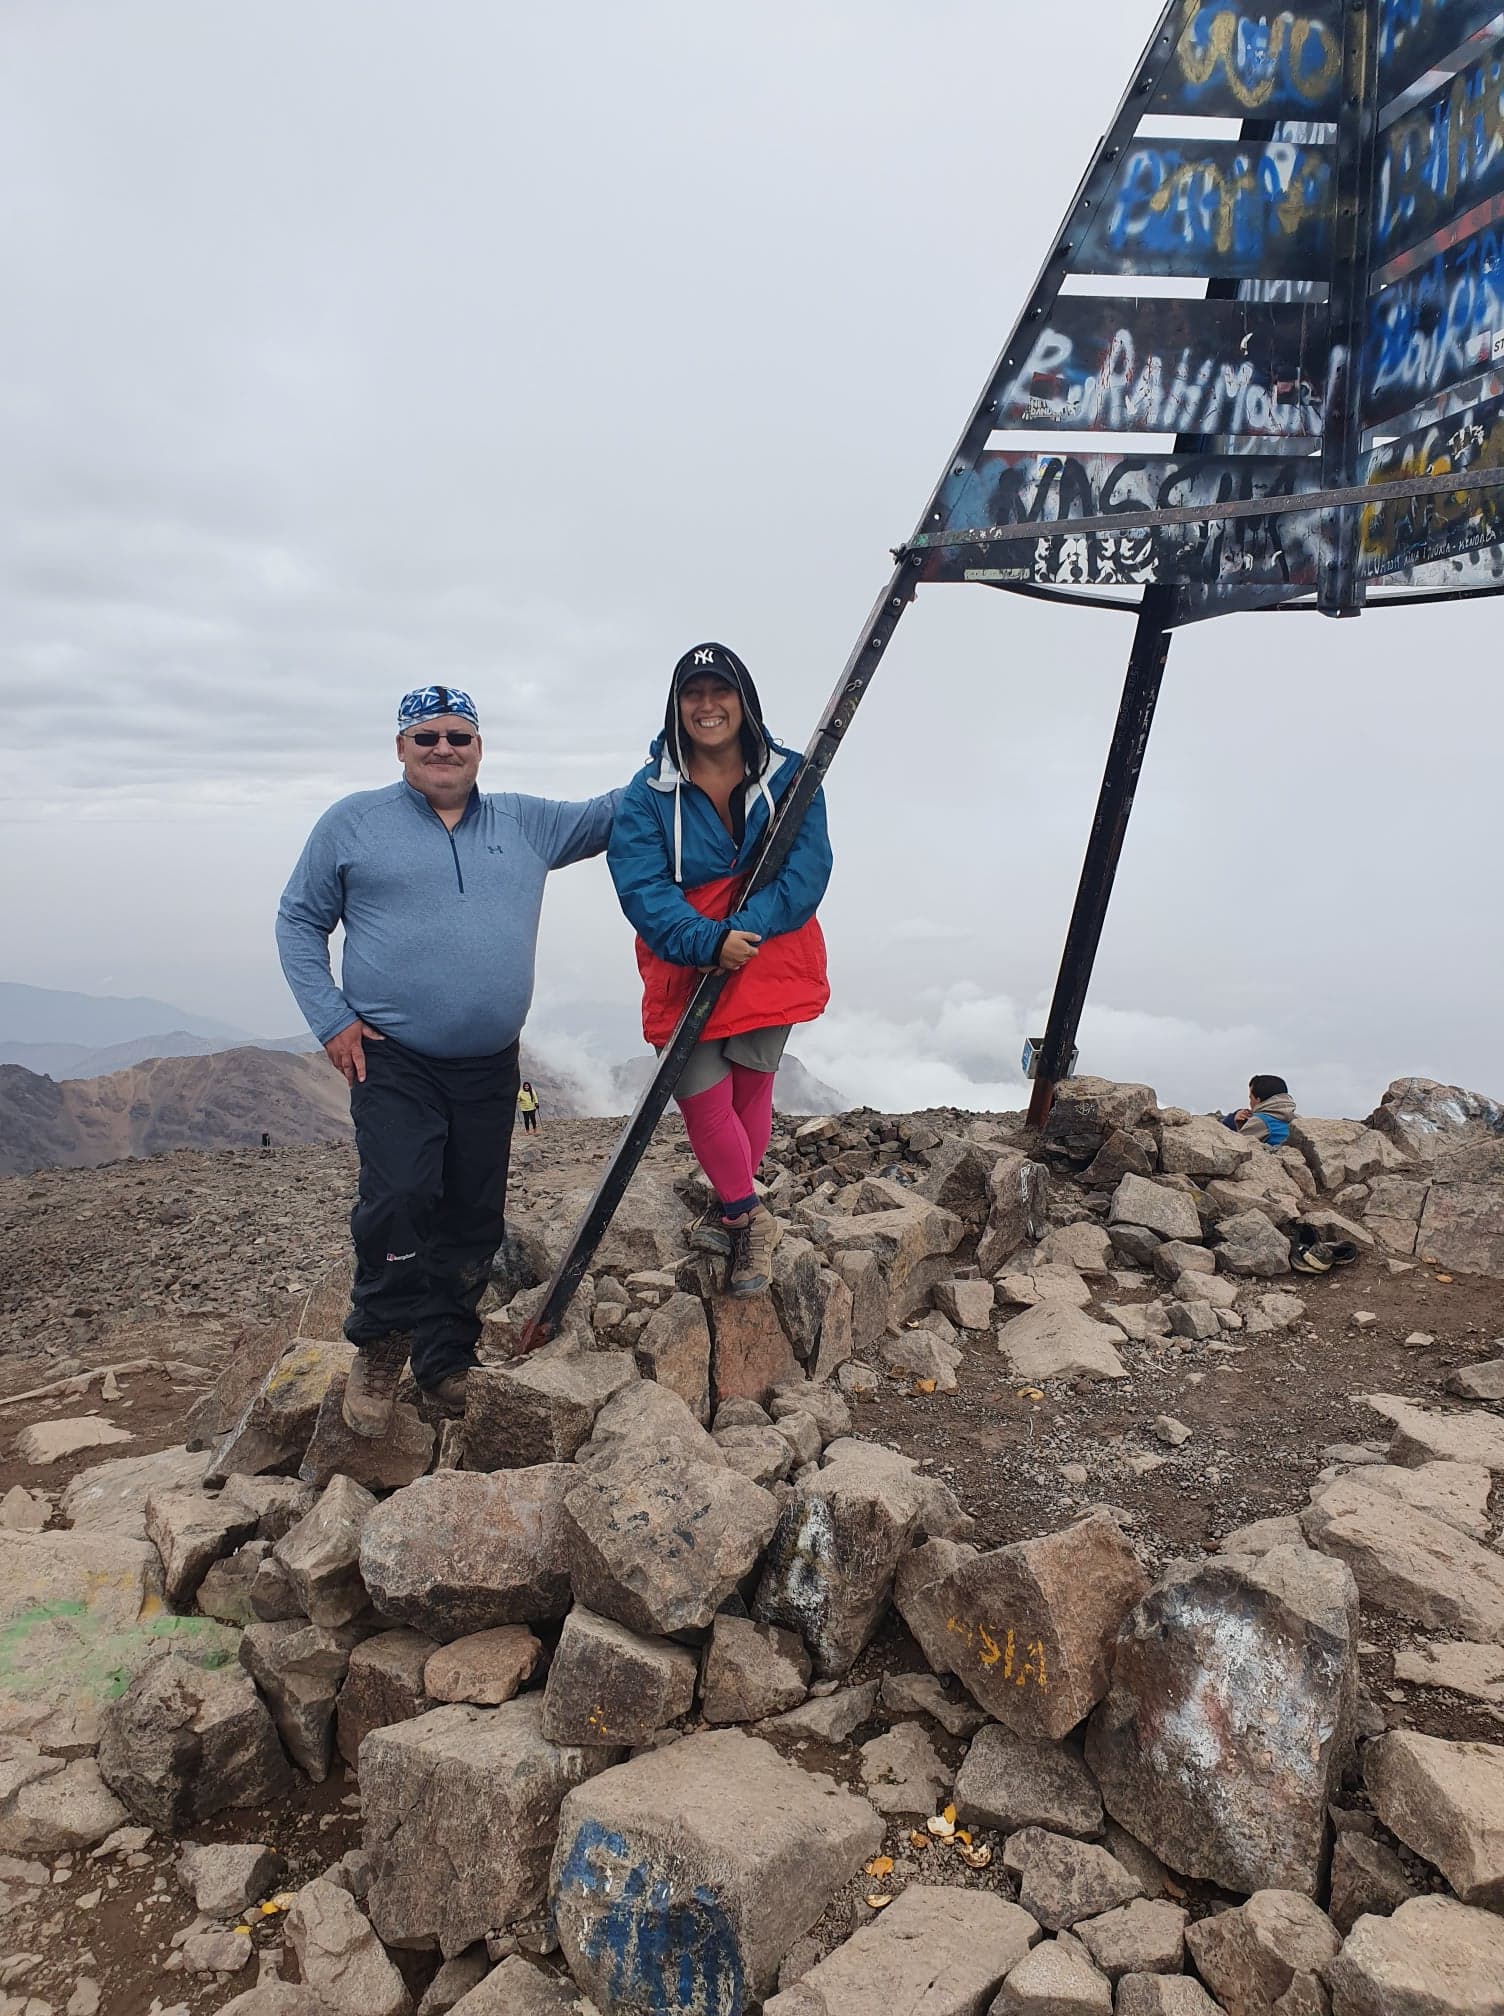 Summit of Mount Toubkal, highest of the Atlas Mountains with my good friend Turath